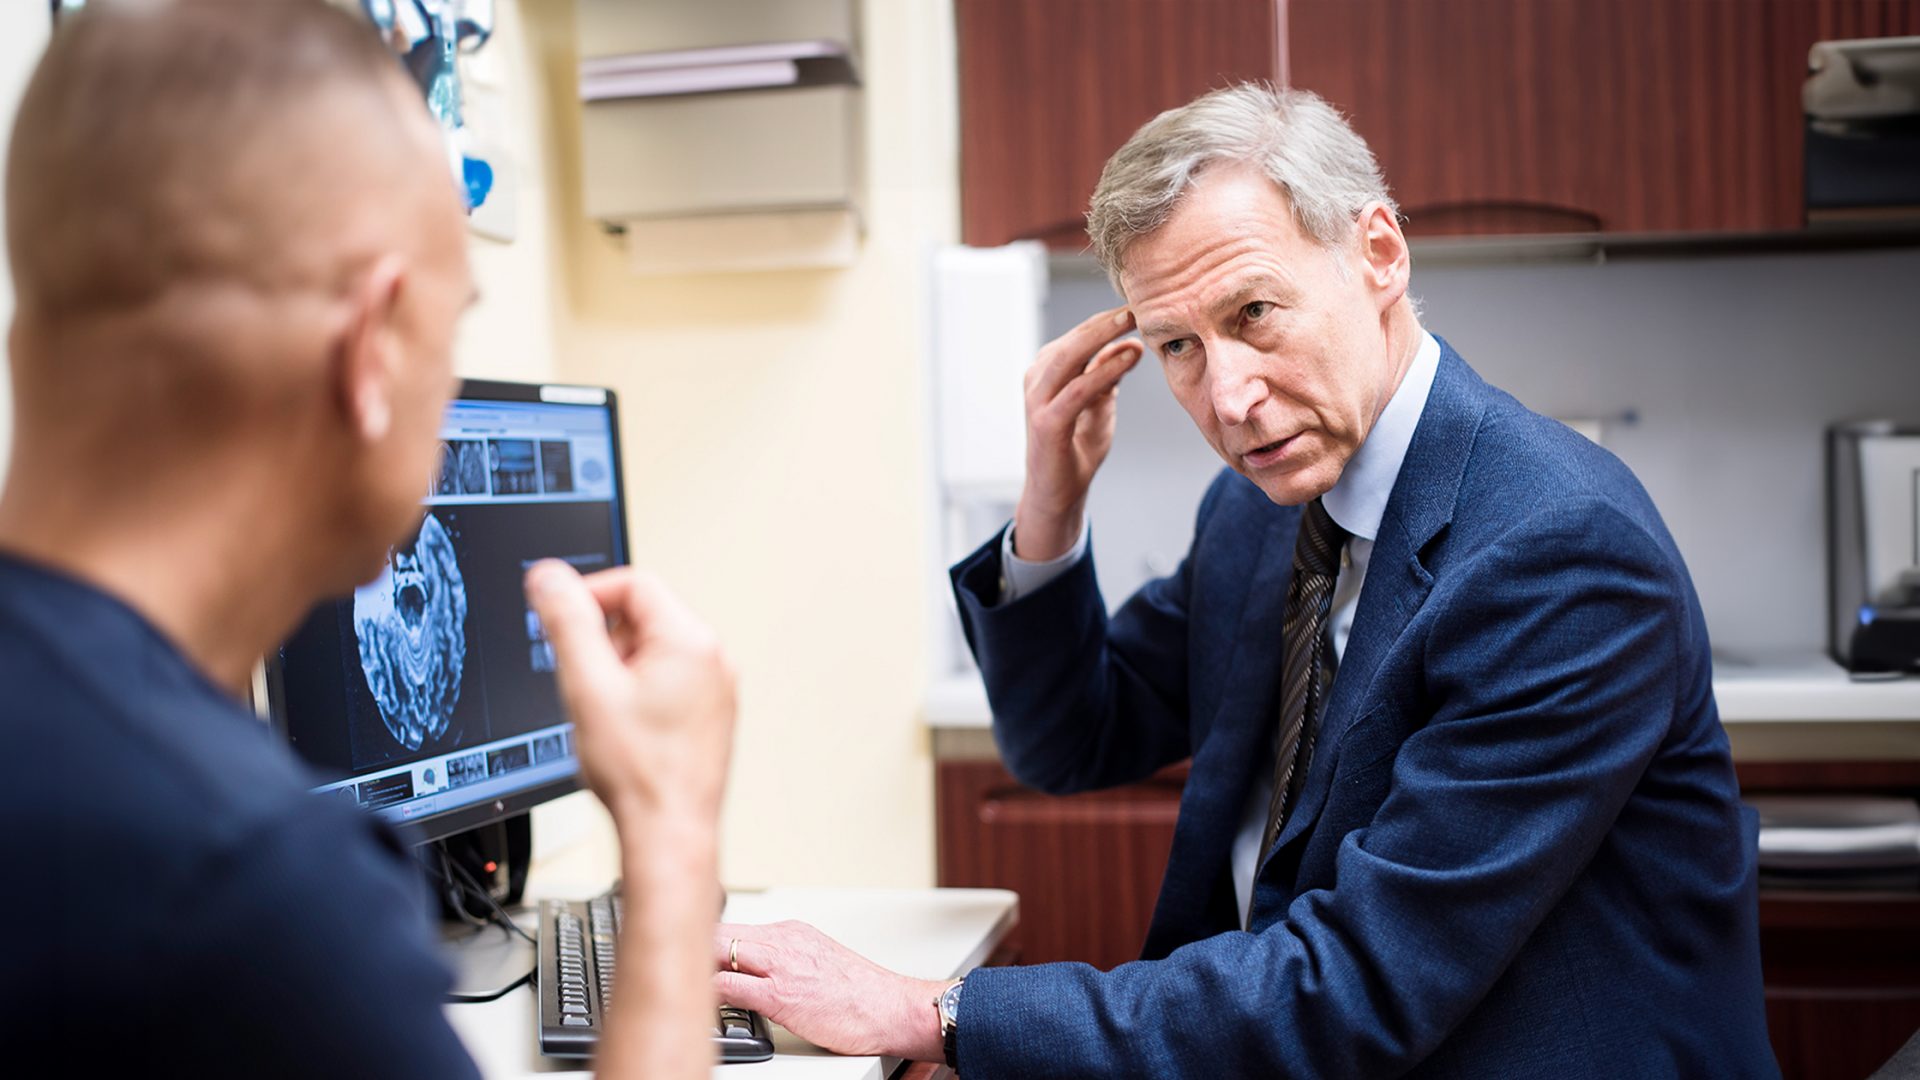 Dr. Orrin Devinsky pointing at the side of his head while reviewing brain imaging results on a computer with a patient